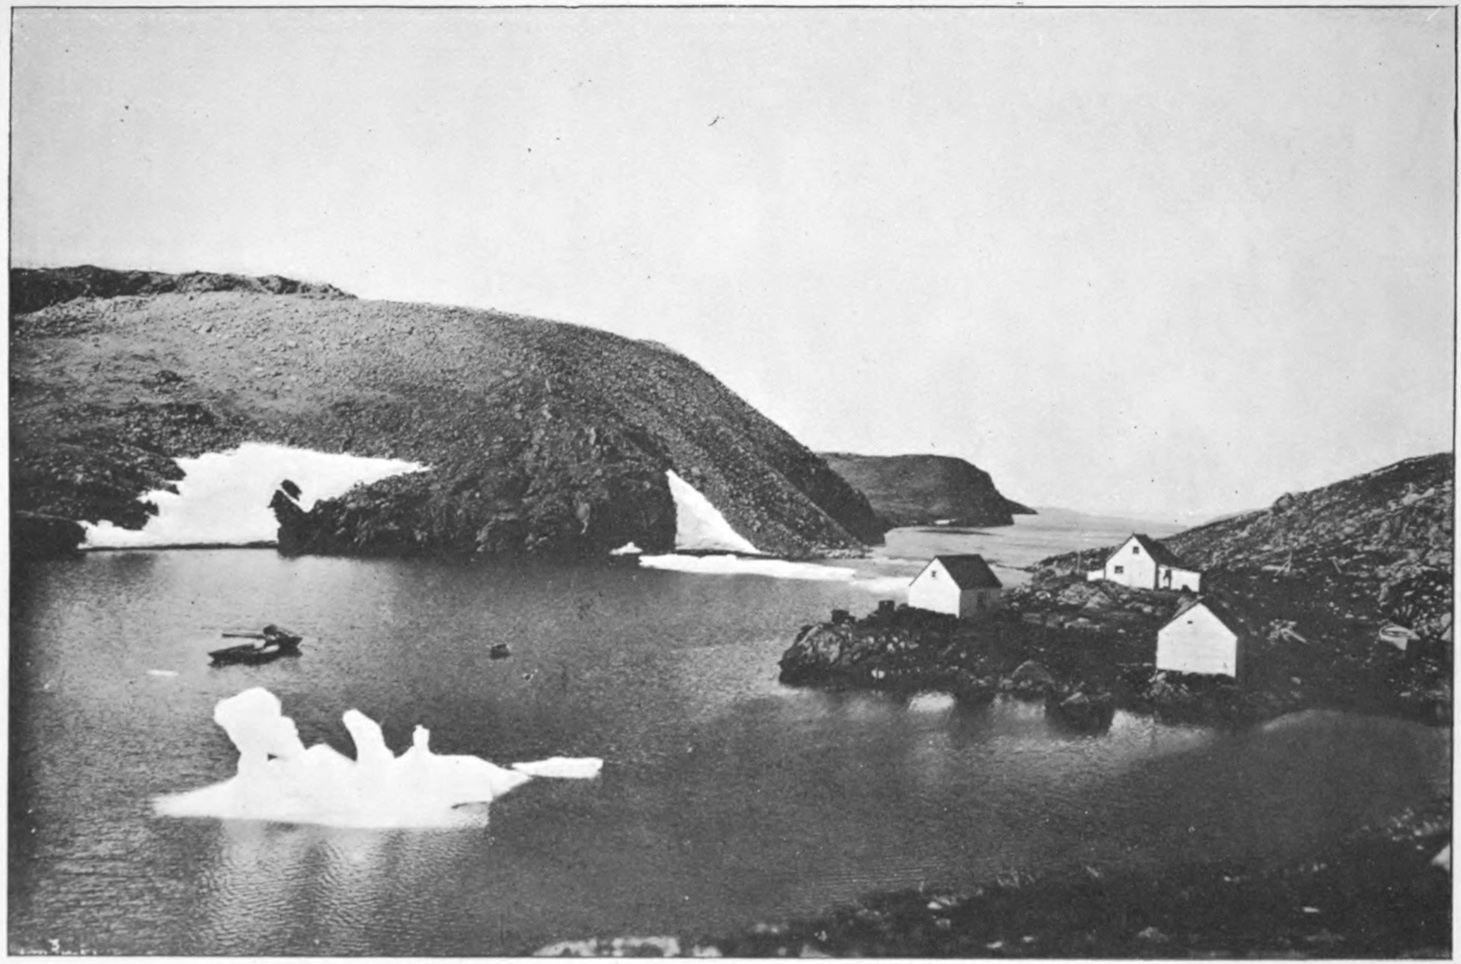 The Project Gutenberg eBook of Report on the Dominion Government Expedition  to Hudson Bay, by A. P. Low